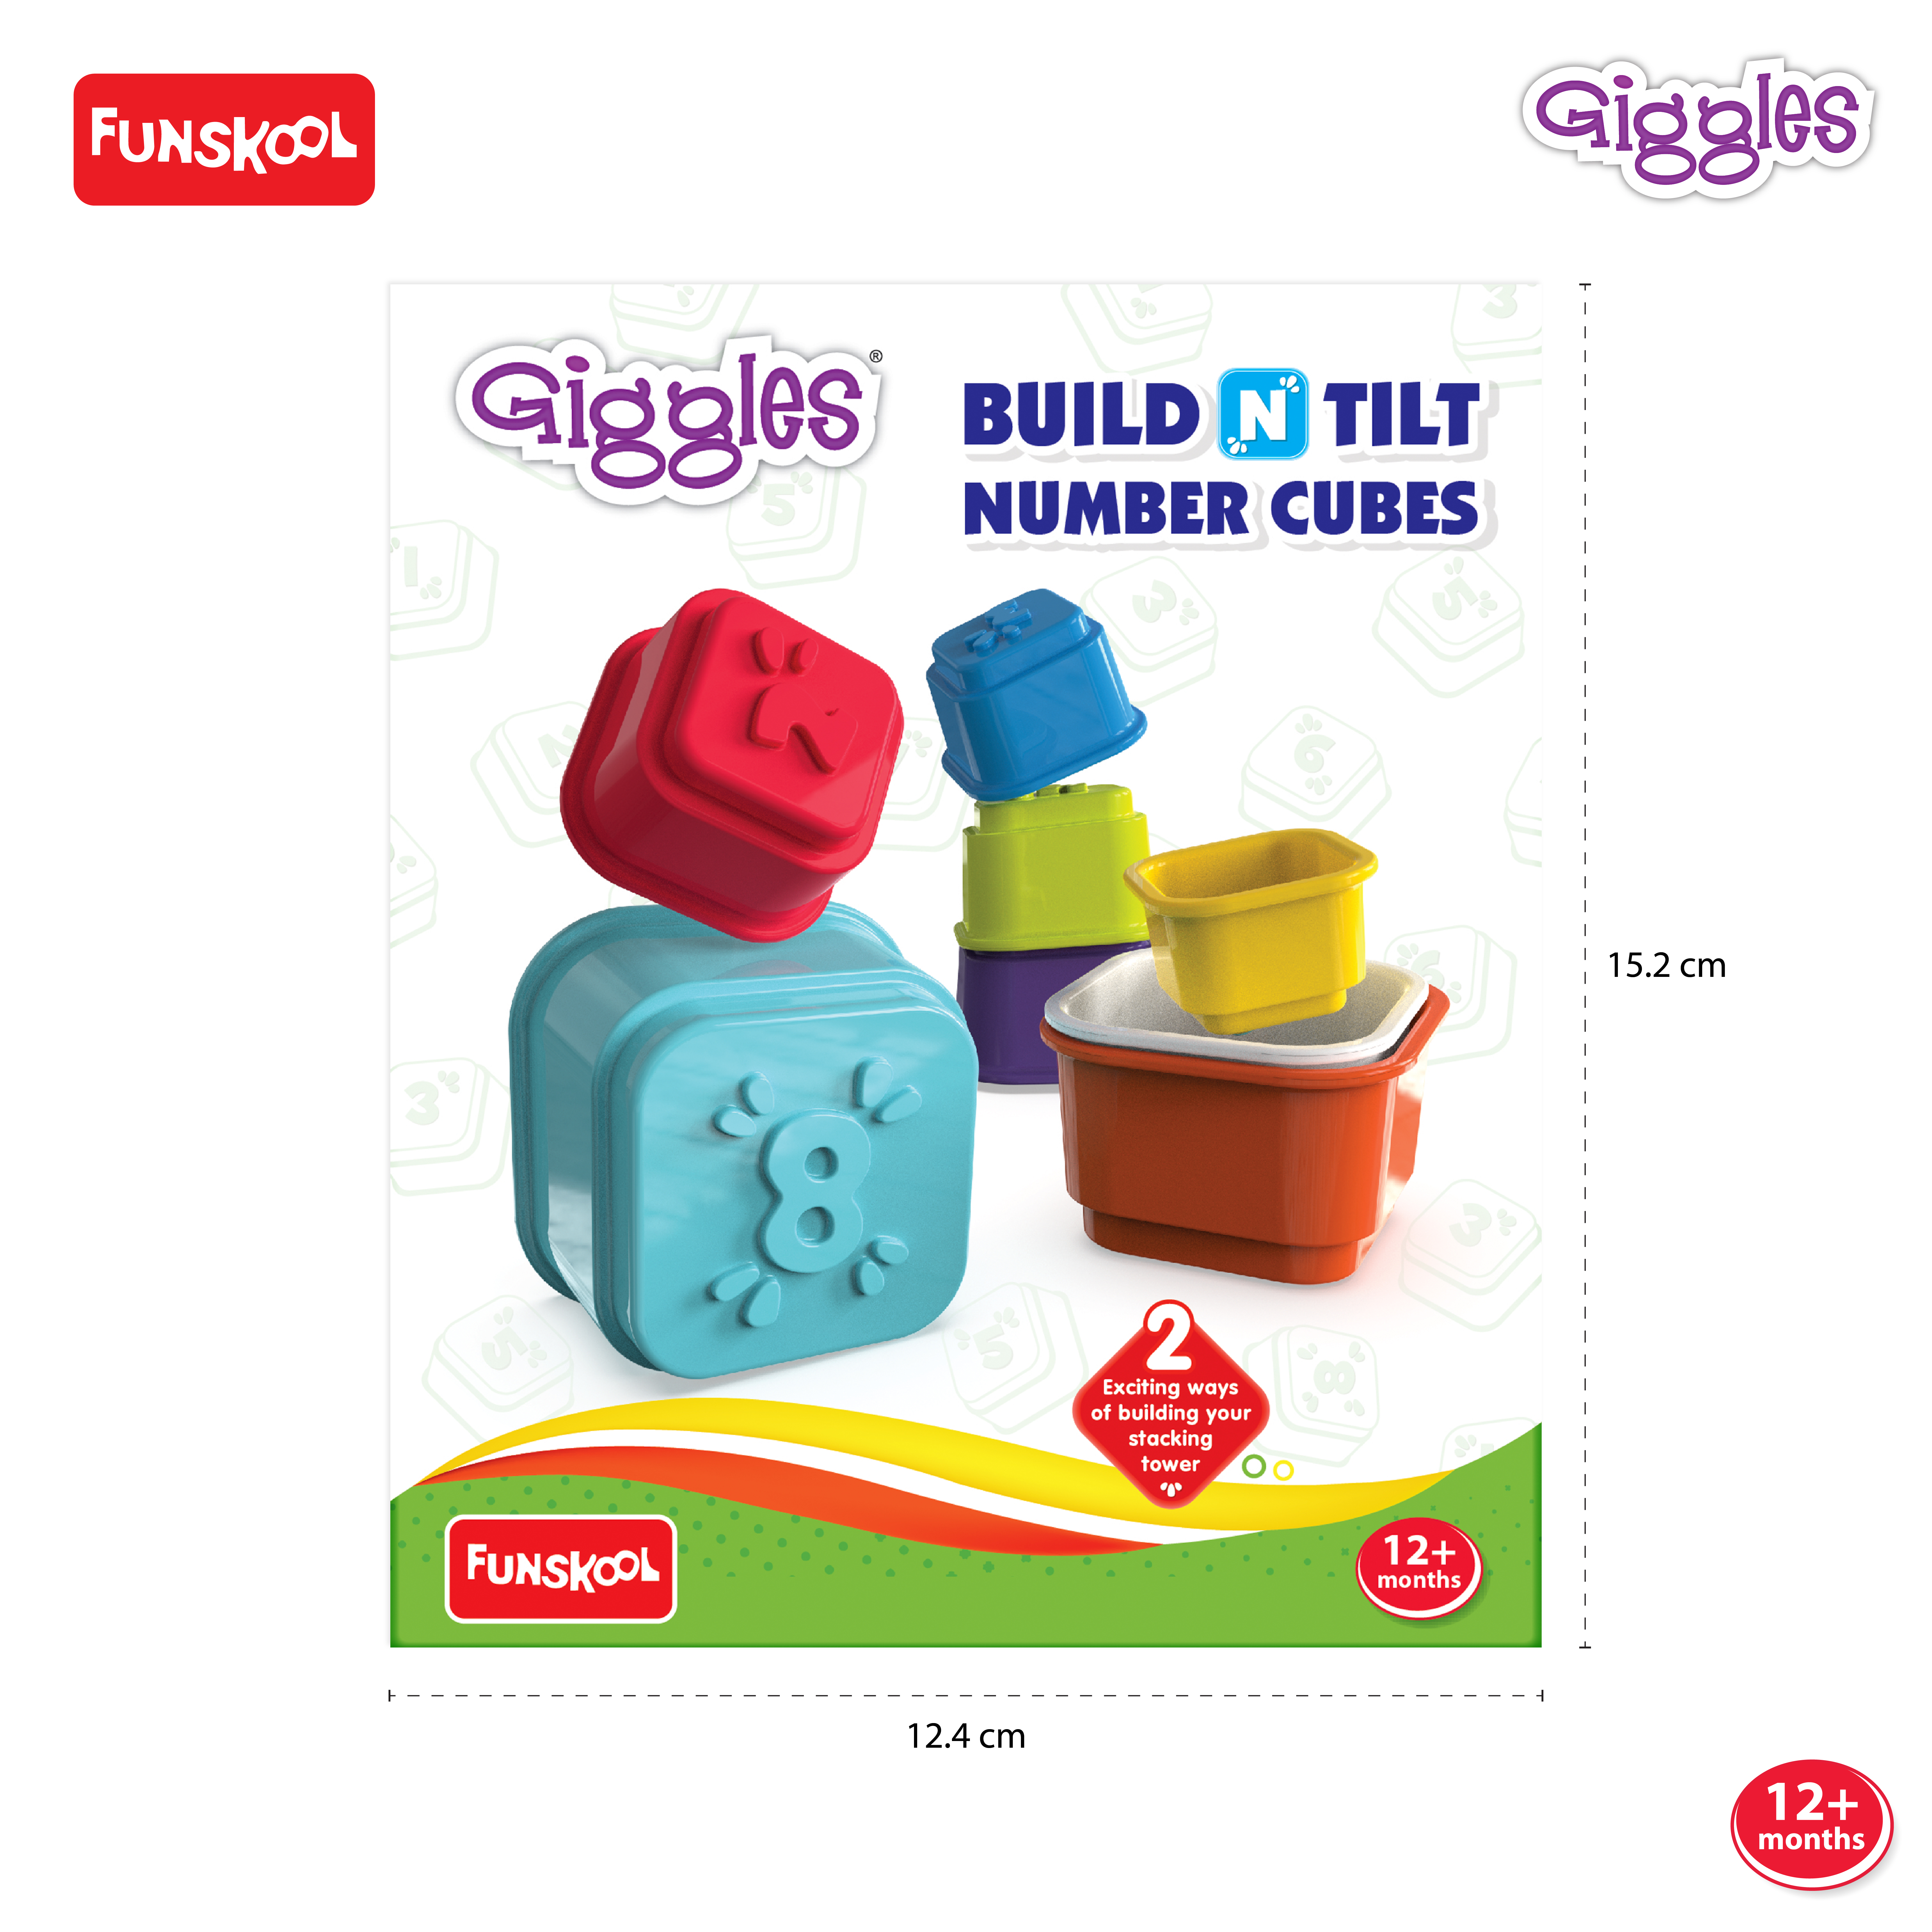 Giggles - Build N Tilt Number Cubes, Multicolour Cubes, Cubes with Numbers, Stack and Nest, 12 Months and above, 2 Modes of Stacking Straight stack and Slant Stack